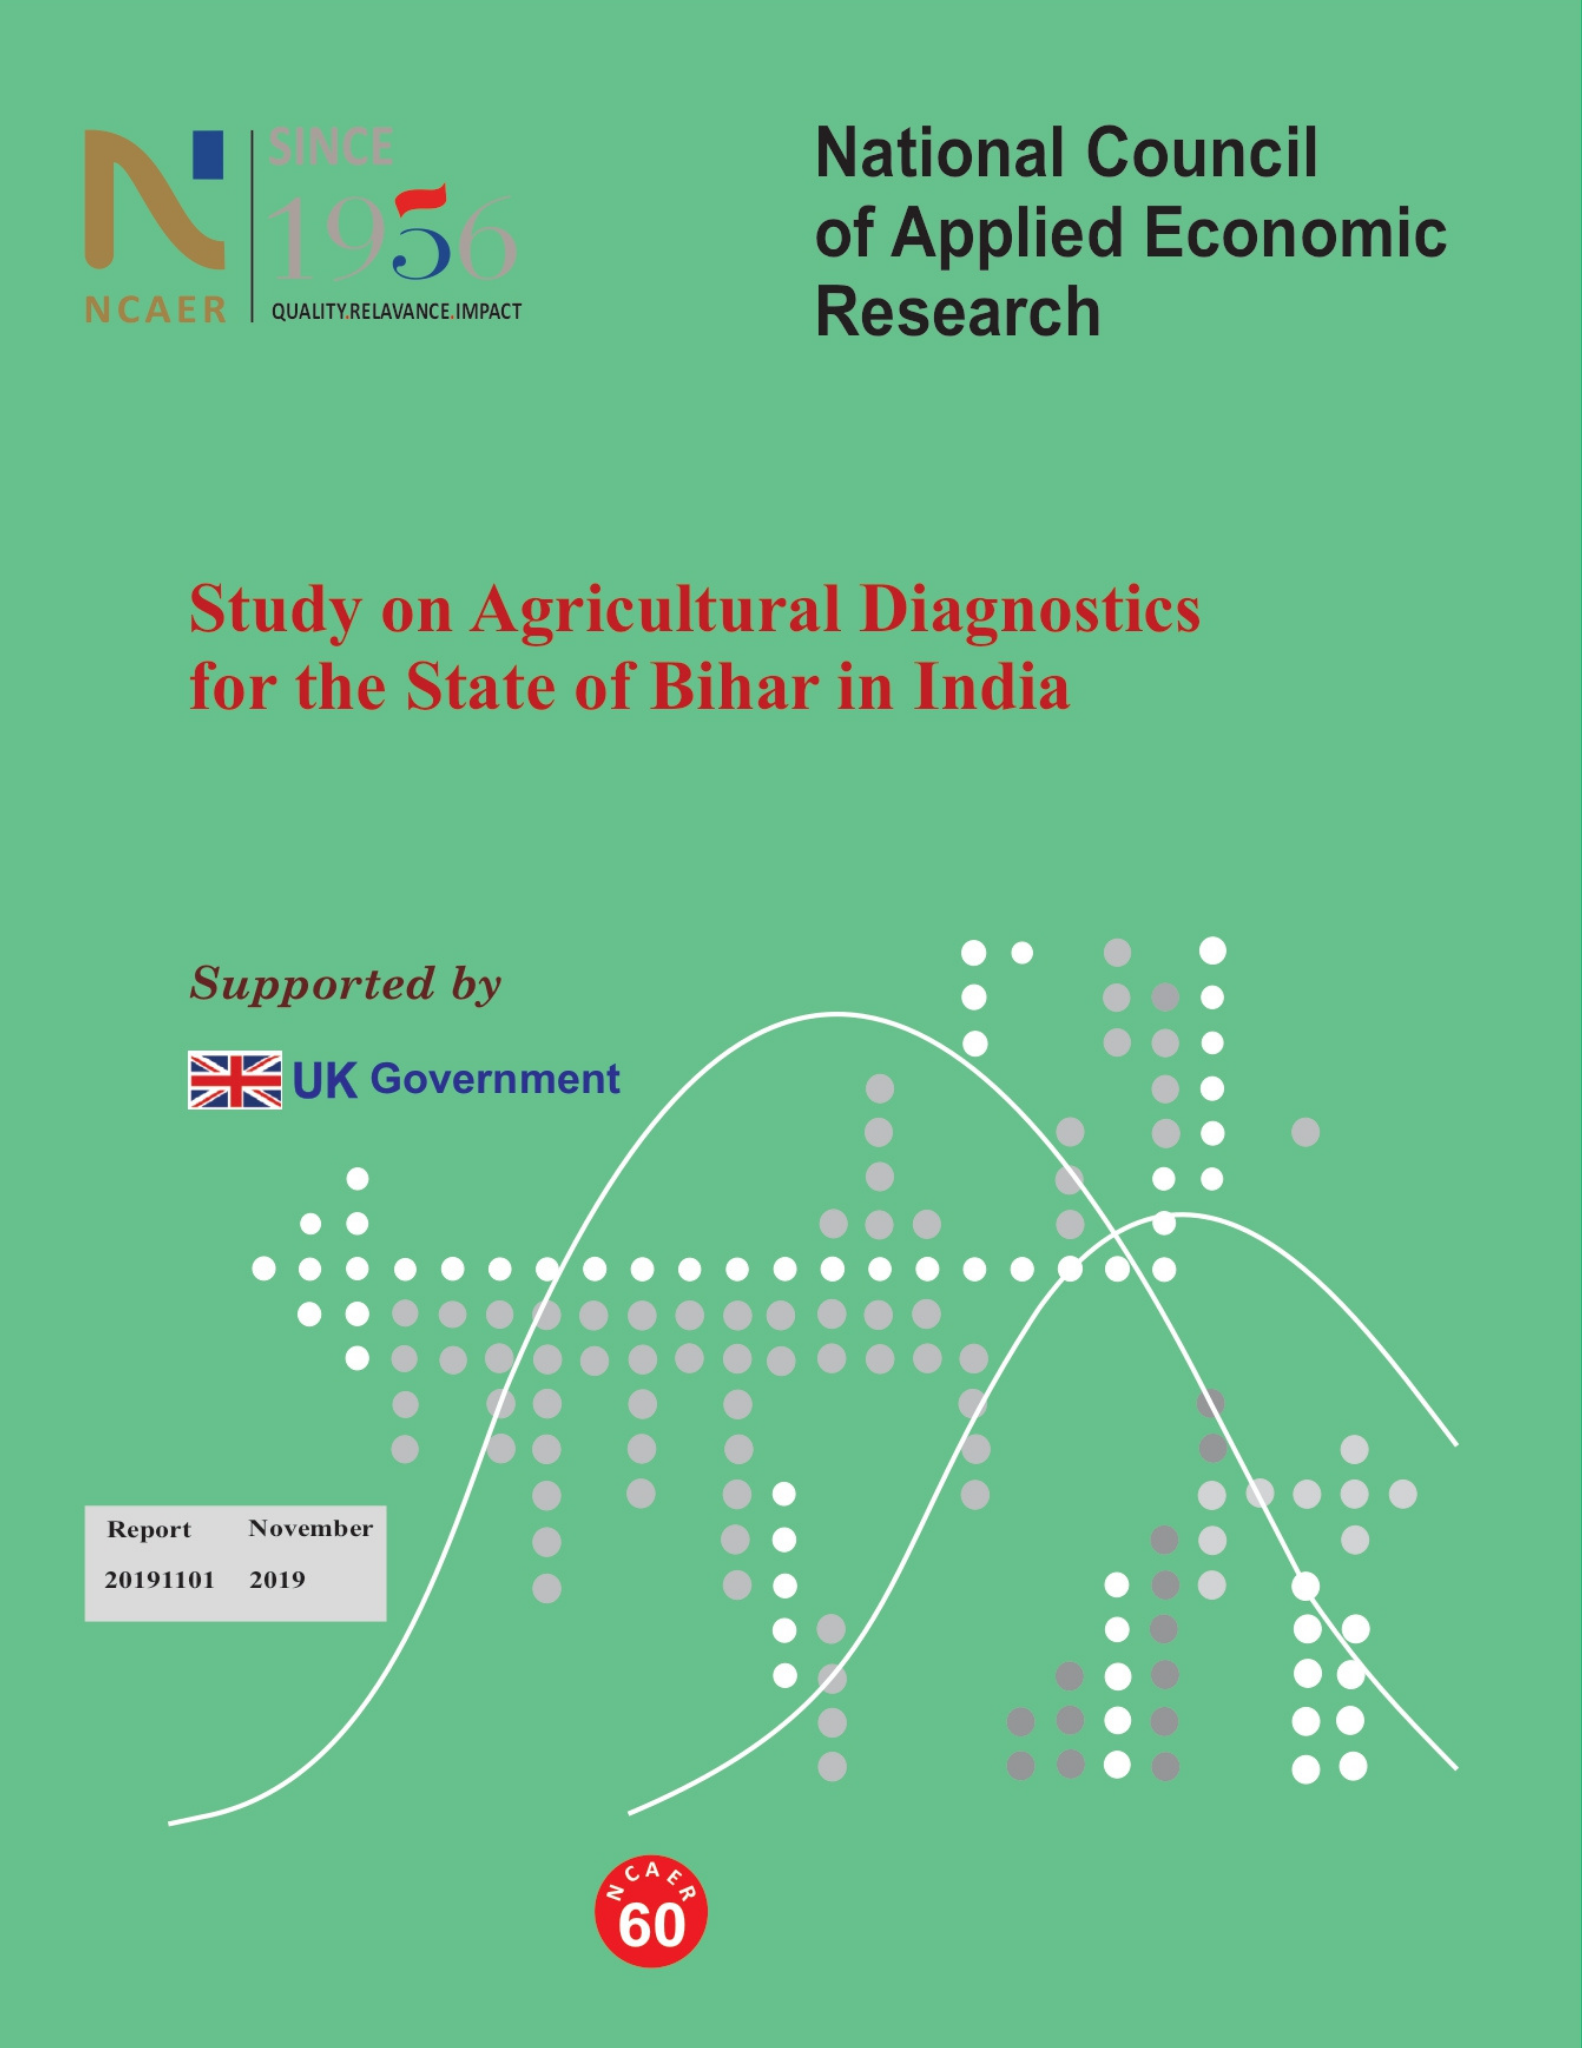 Study on Agricultural Diagnostics for the State of Bihar in India